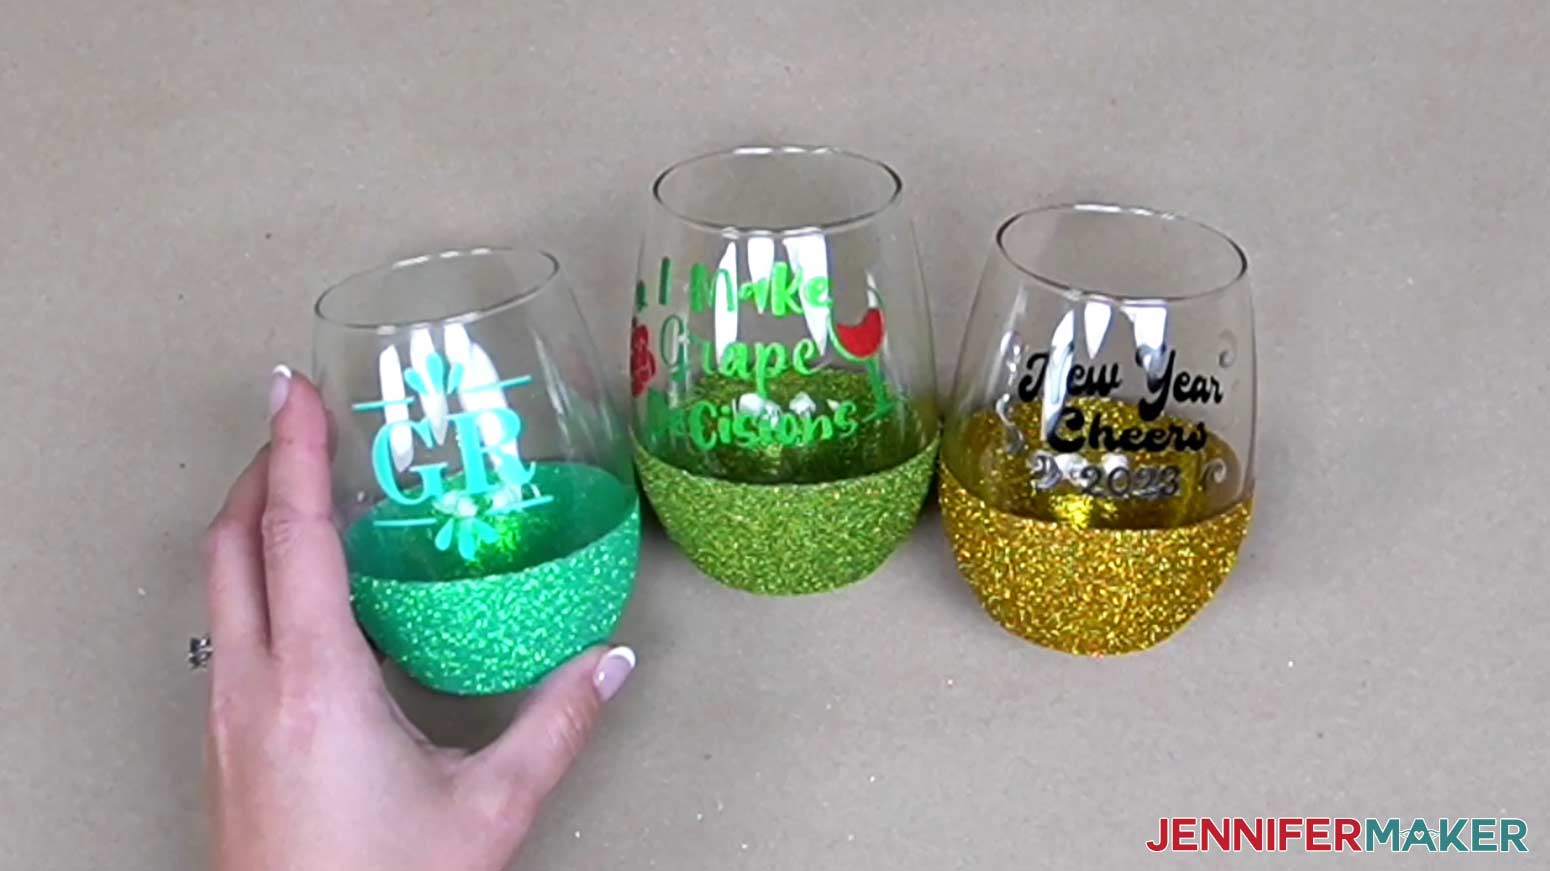 The glitter wine glasses are now ready to show off.